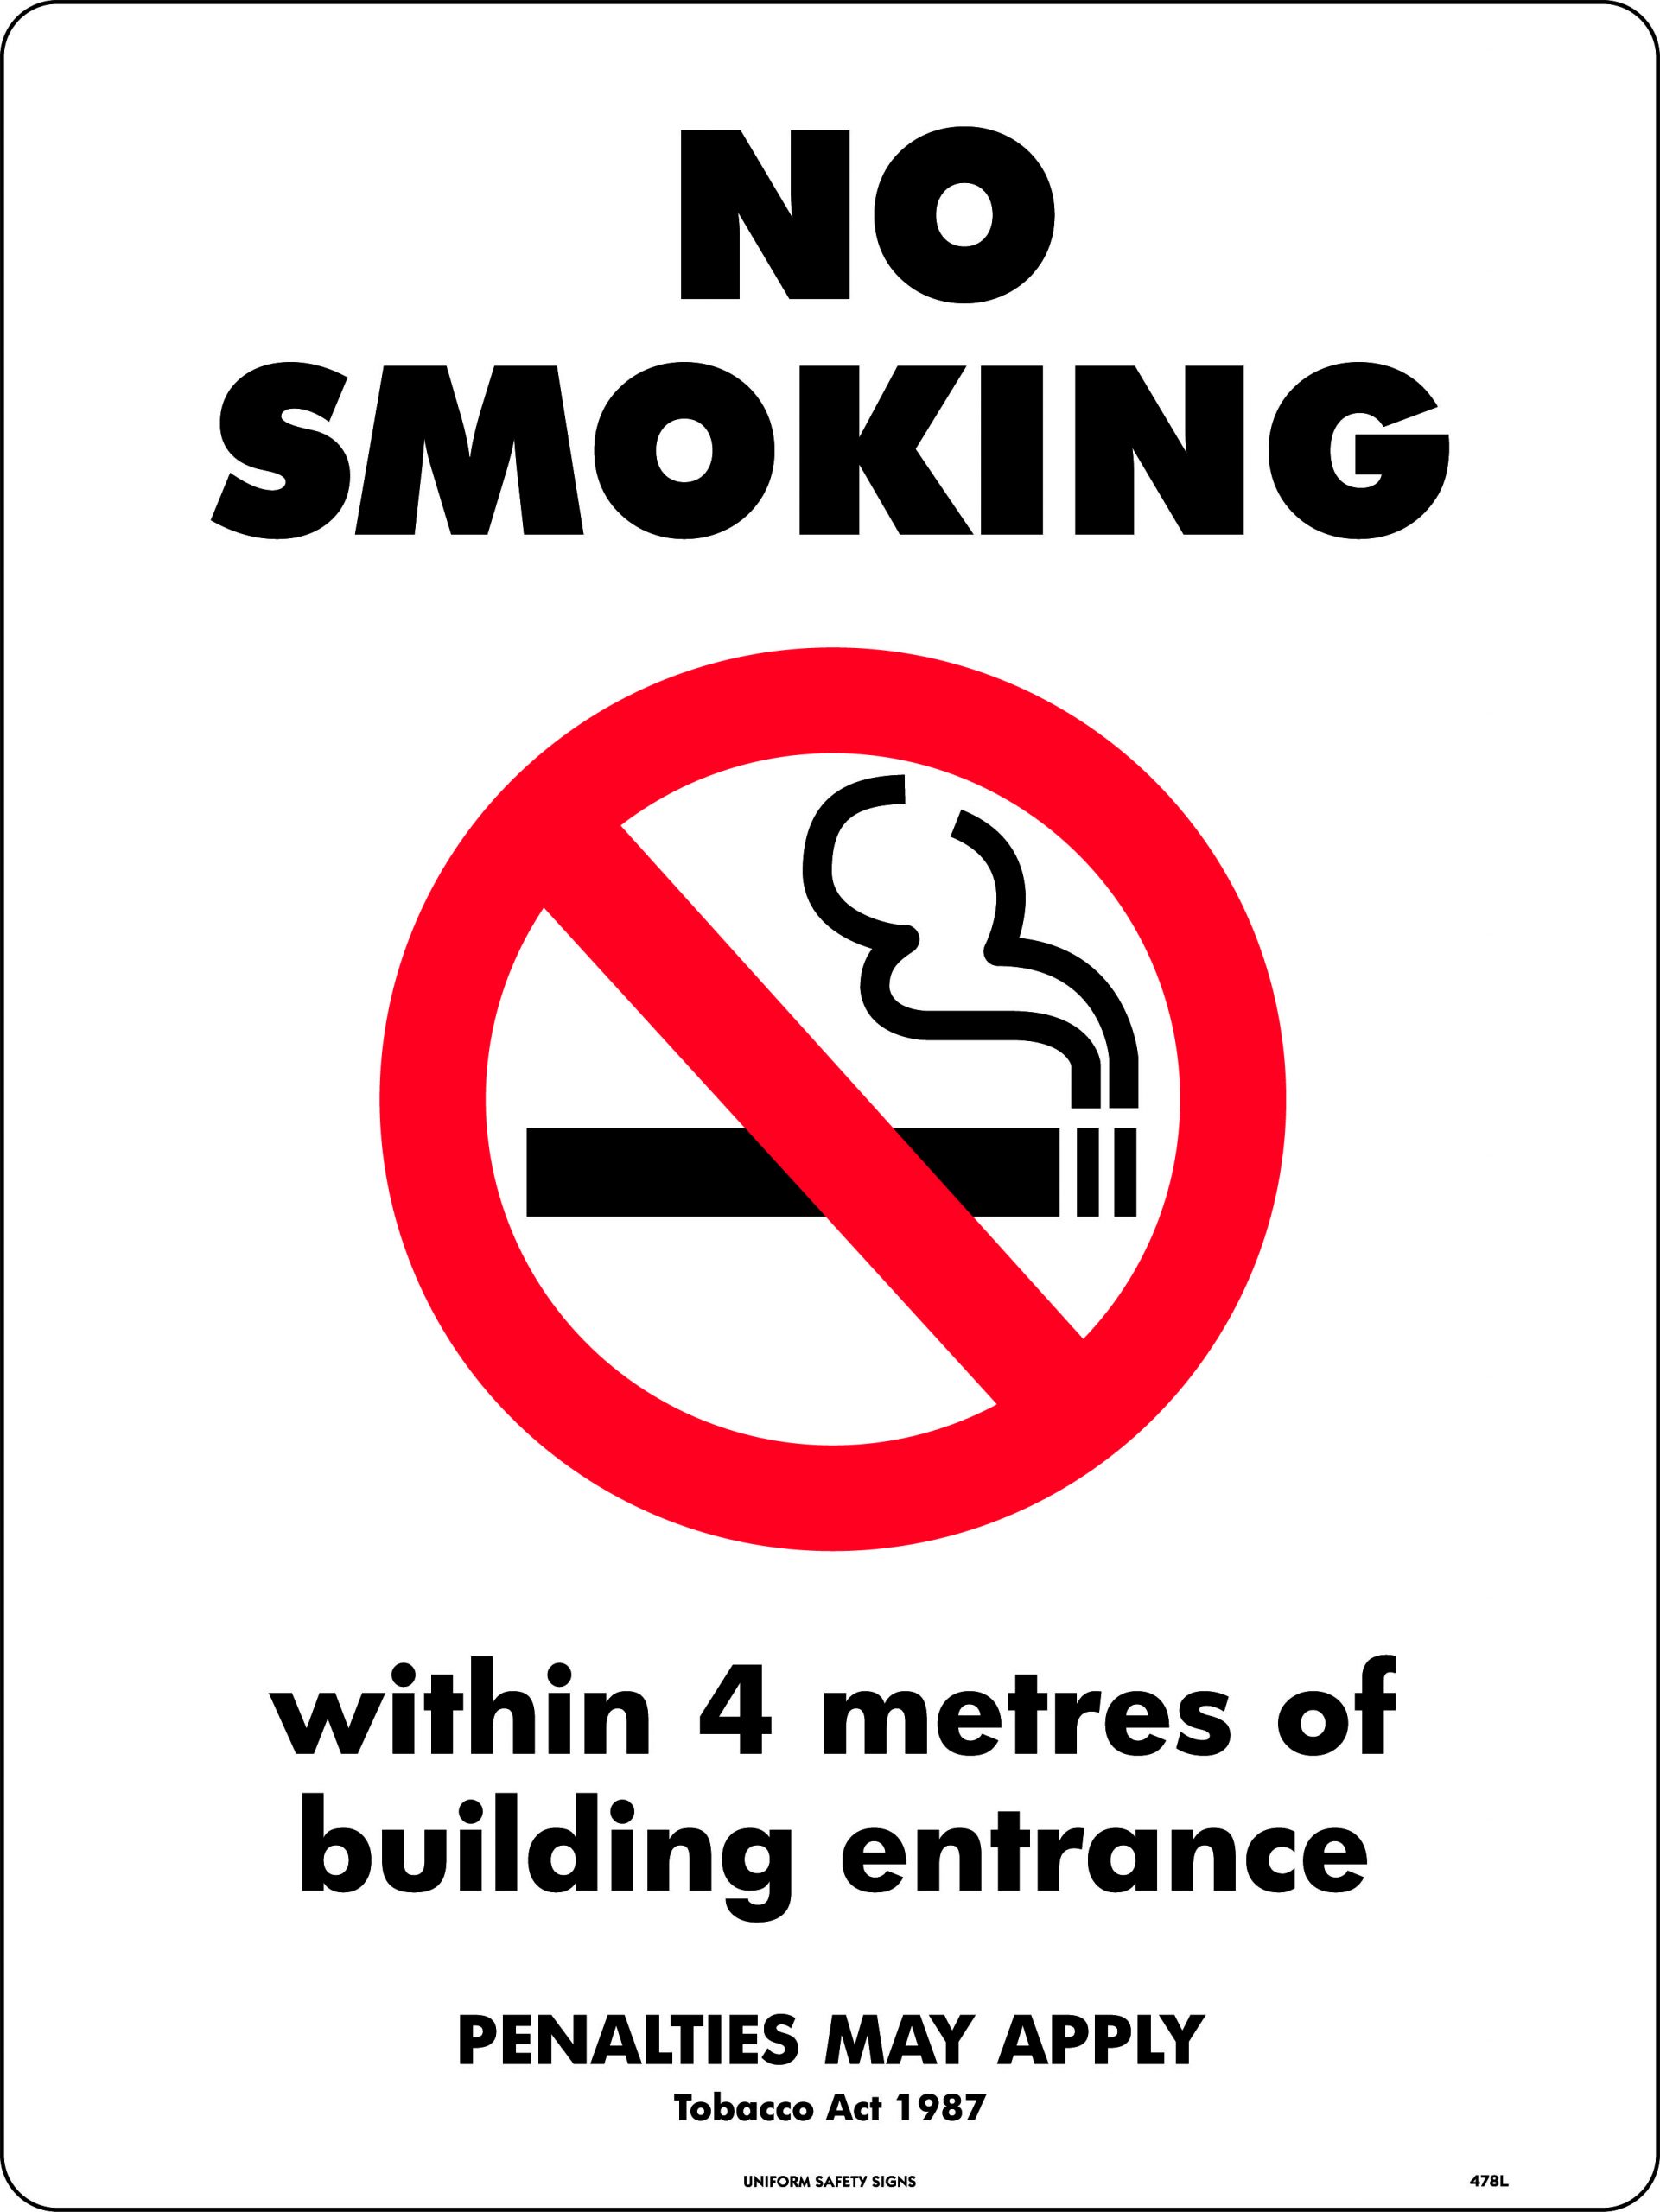 VARIOUS SIGN & STICKER OPTIONS NO SMOKING WITHIN 4 METRES OF BUILDING ENTRANCE